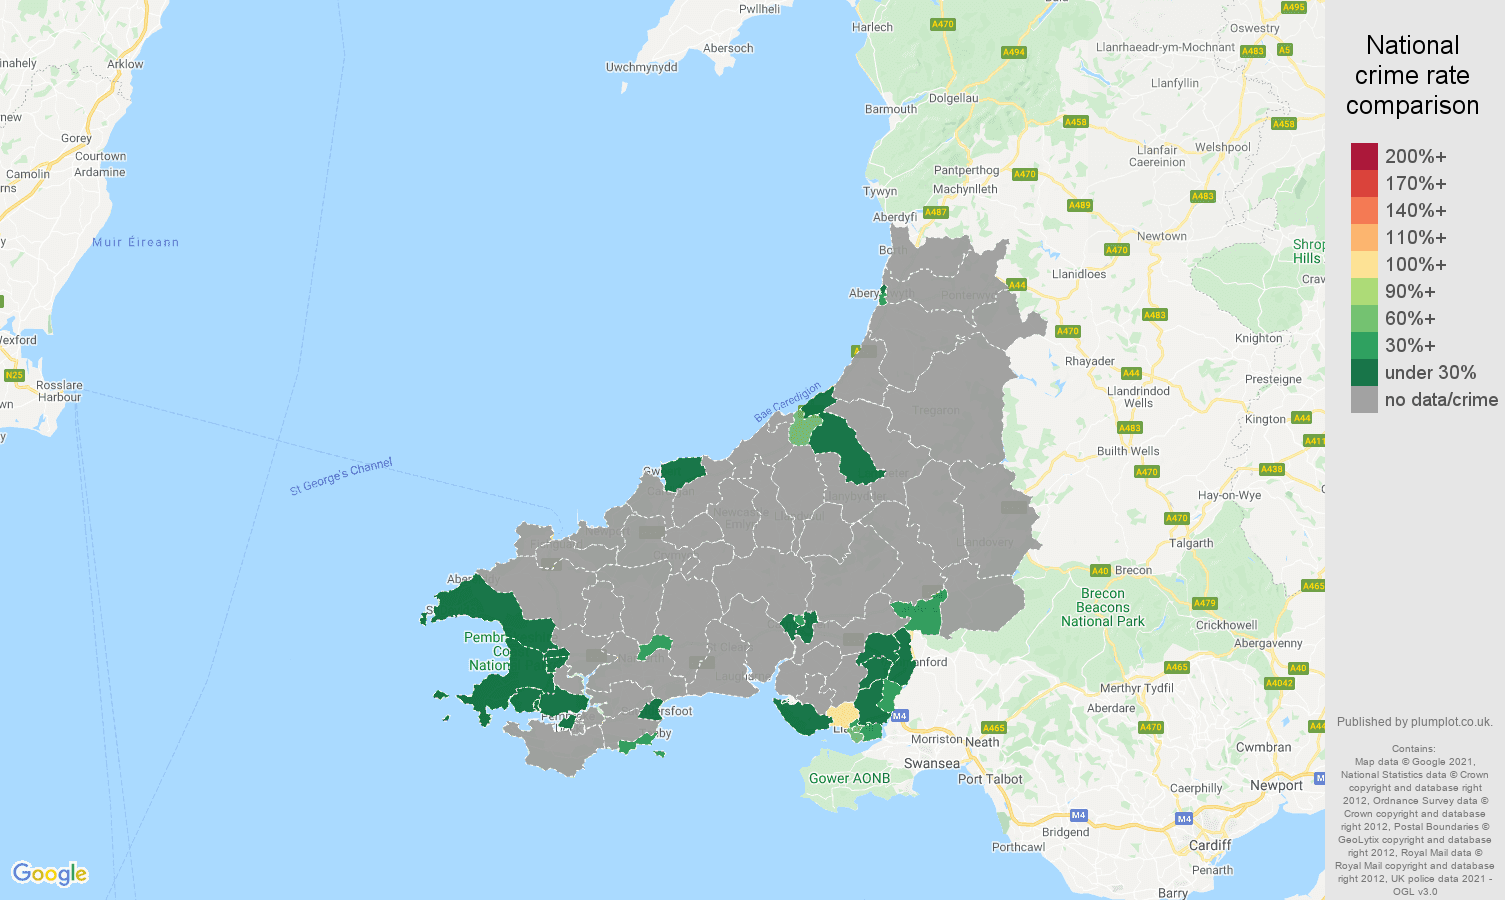 Dyfed bicycle theft crime rate comparison map